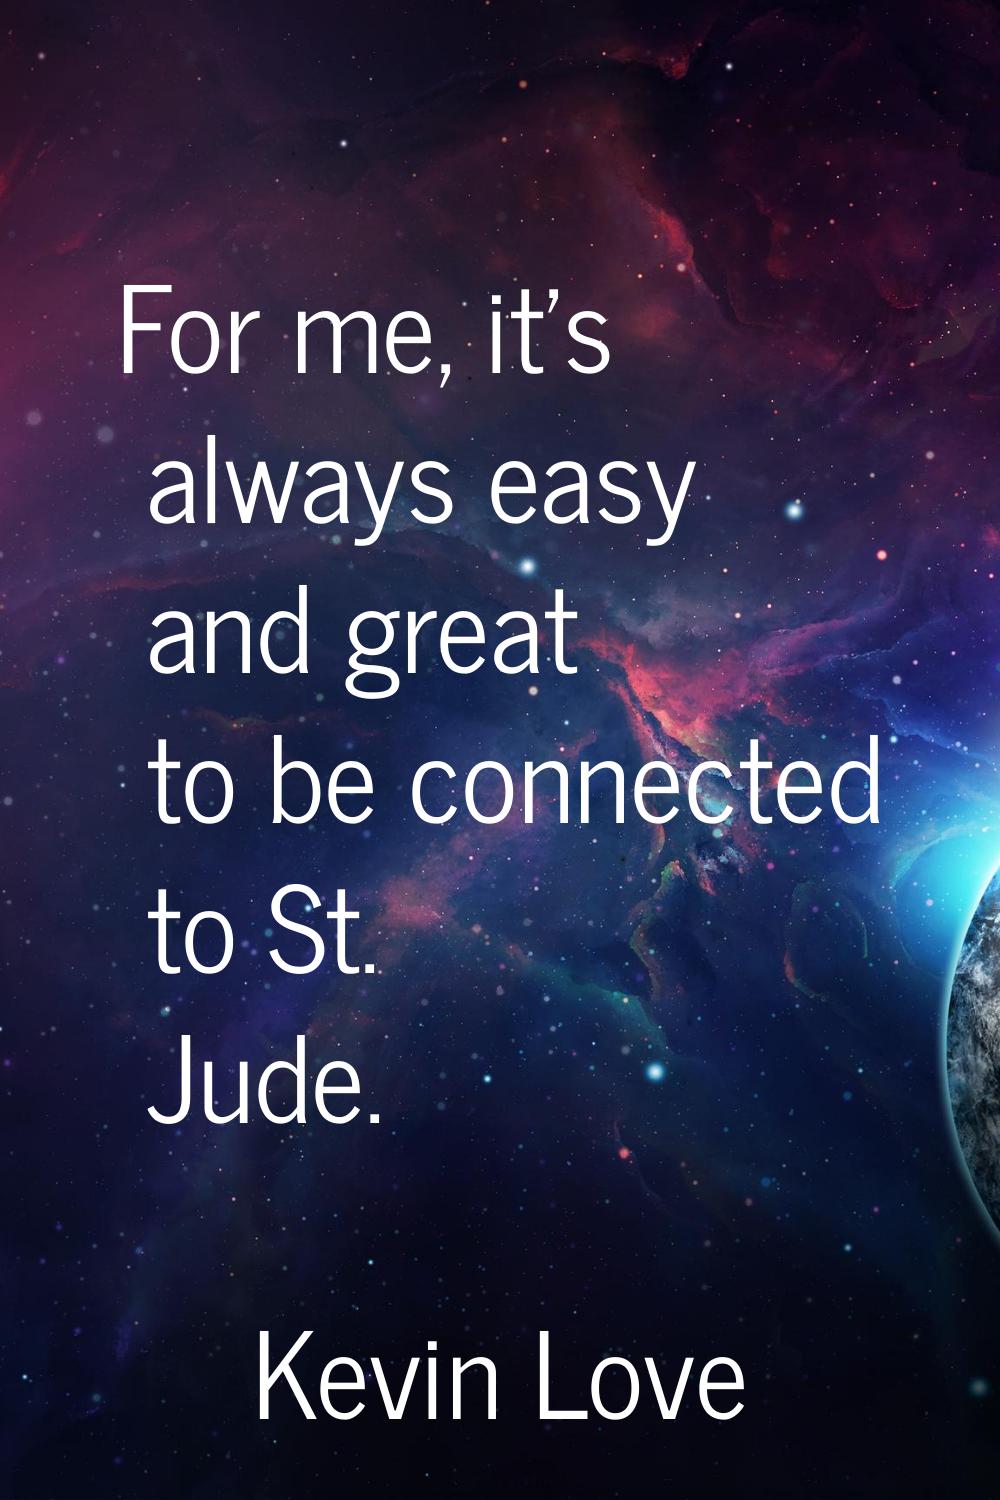 For me, it's always easy and great to be connected to St. Jude.